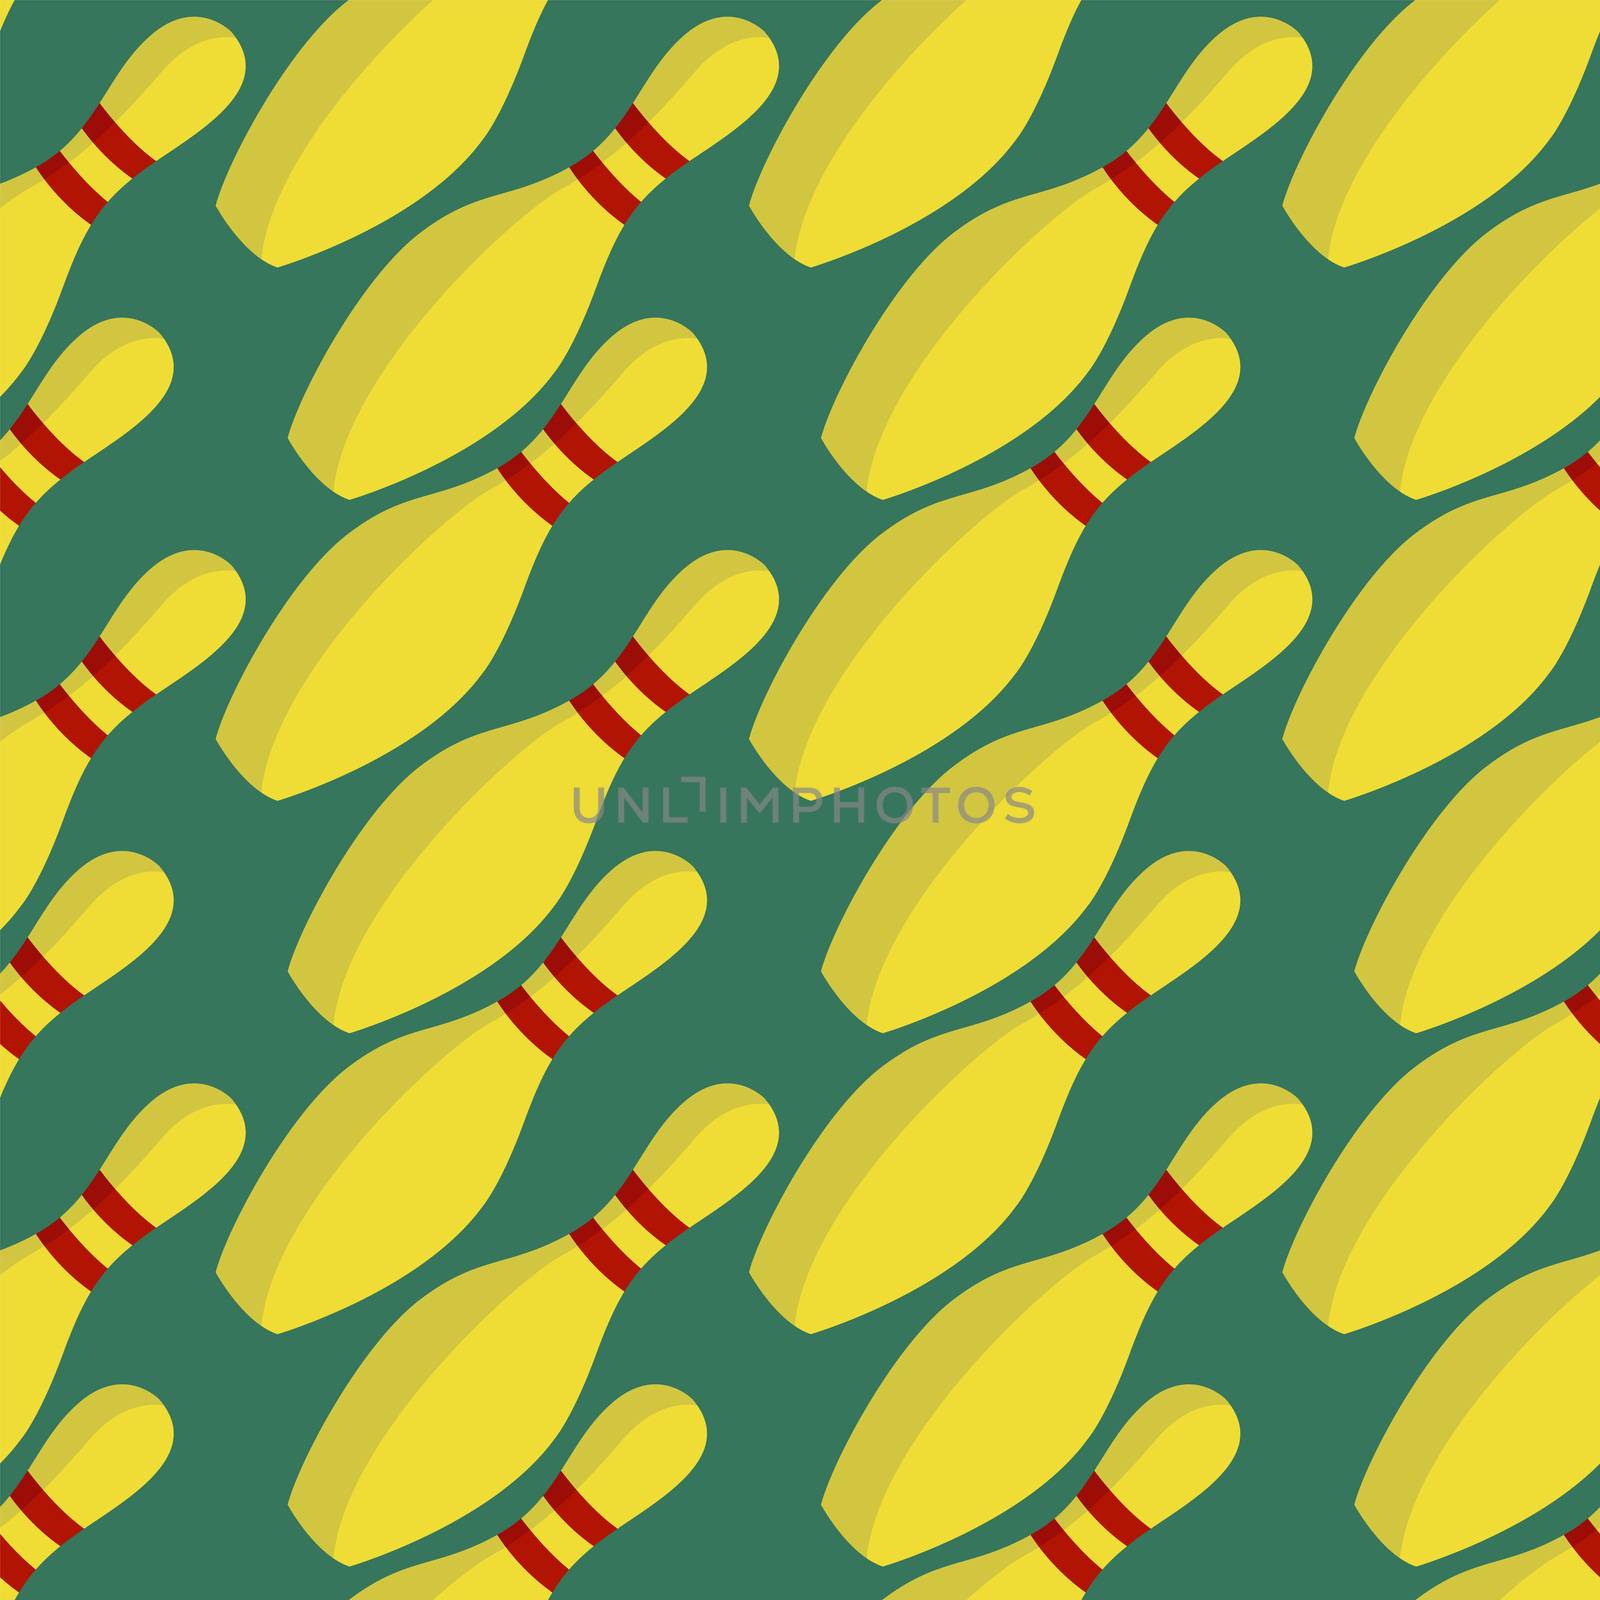 Bowling pin pattern , illustration, vector on white background